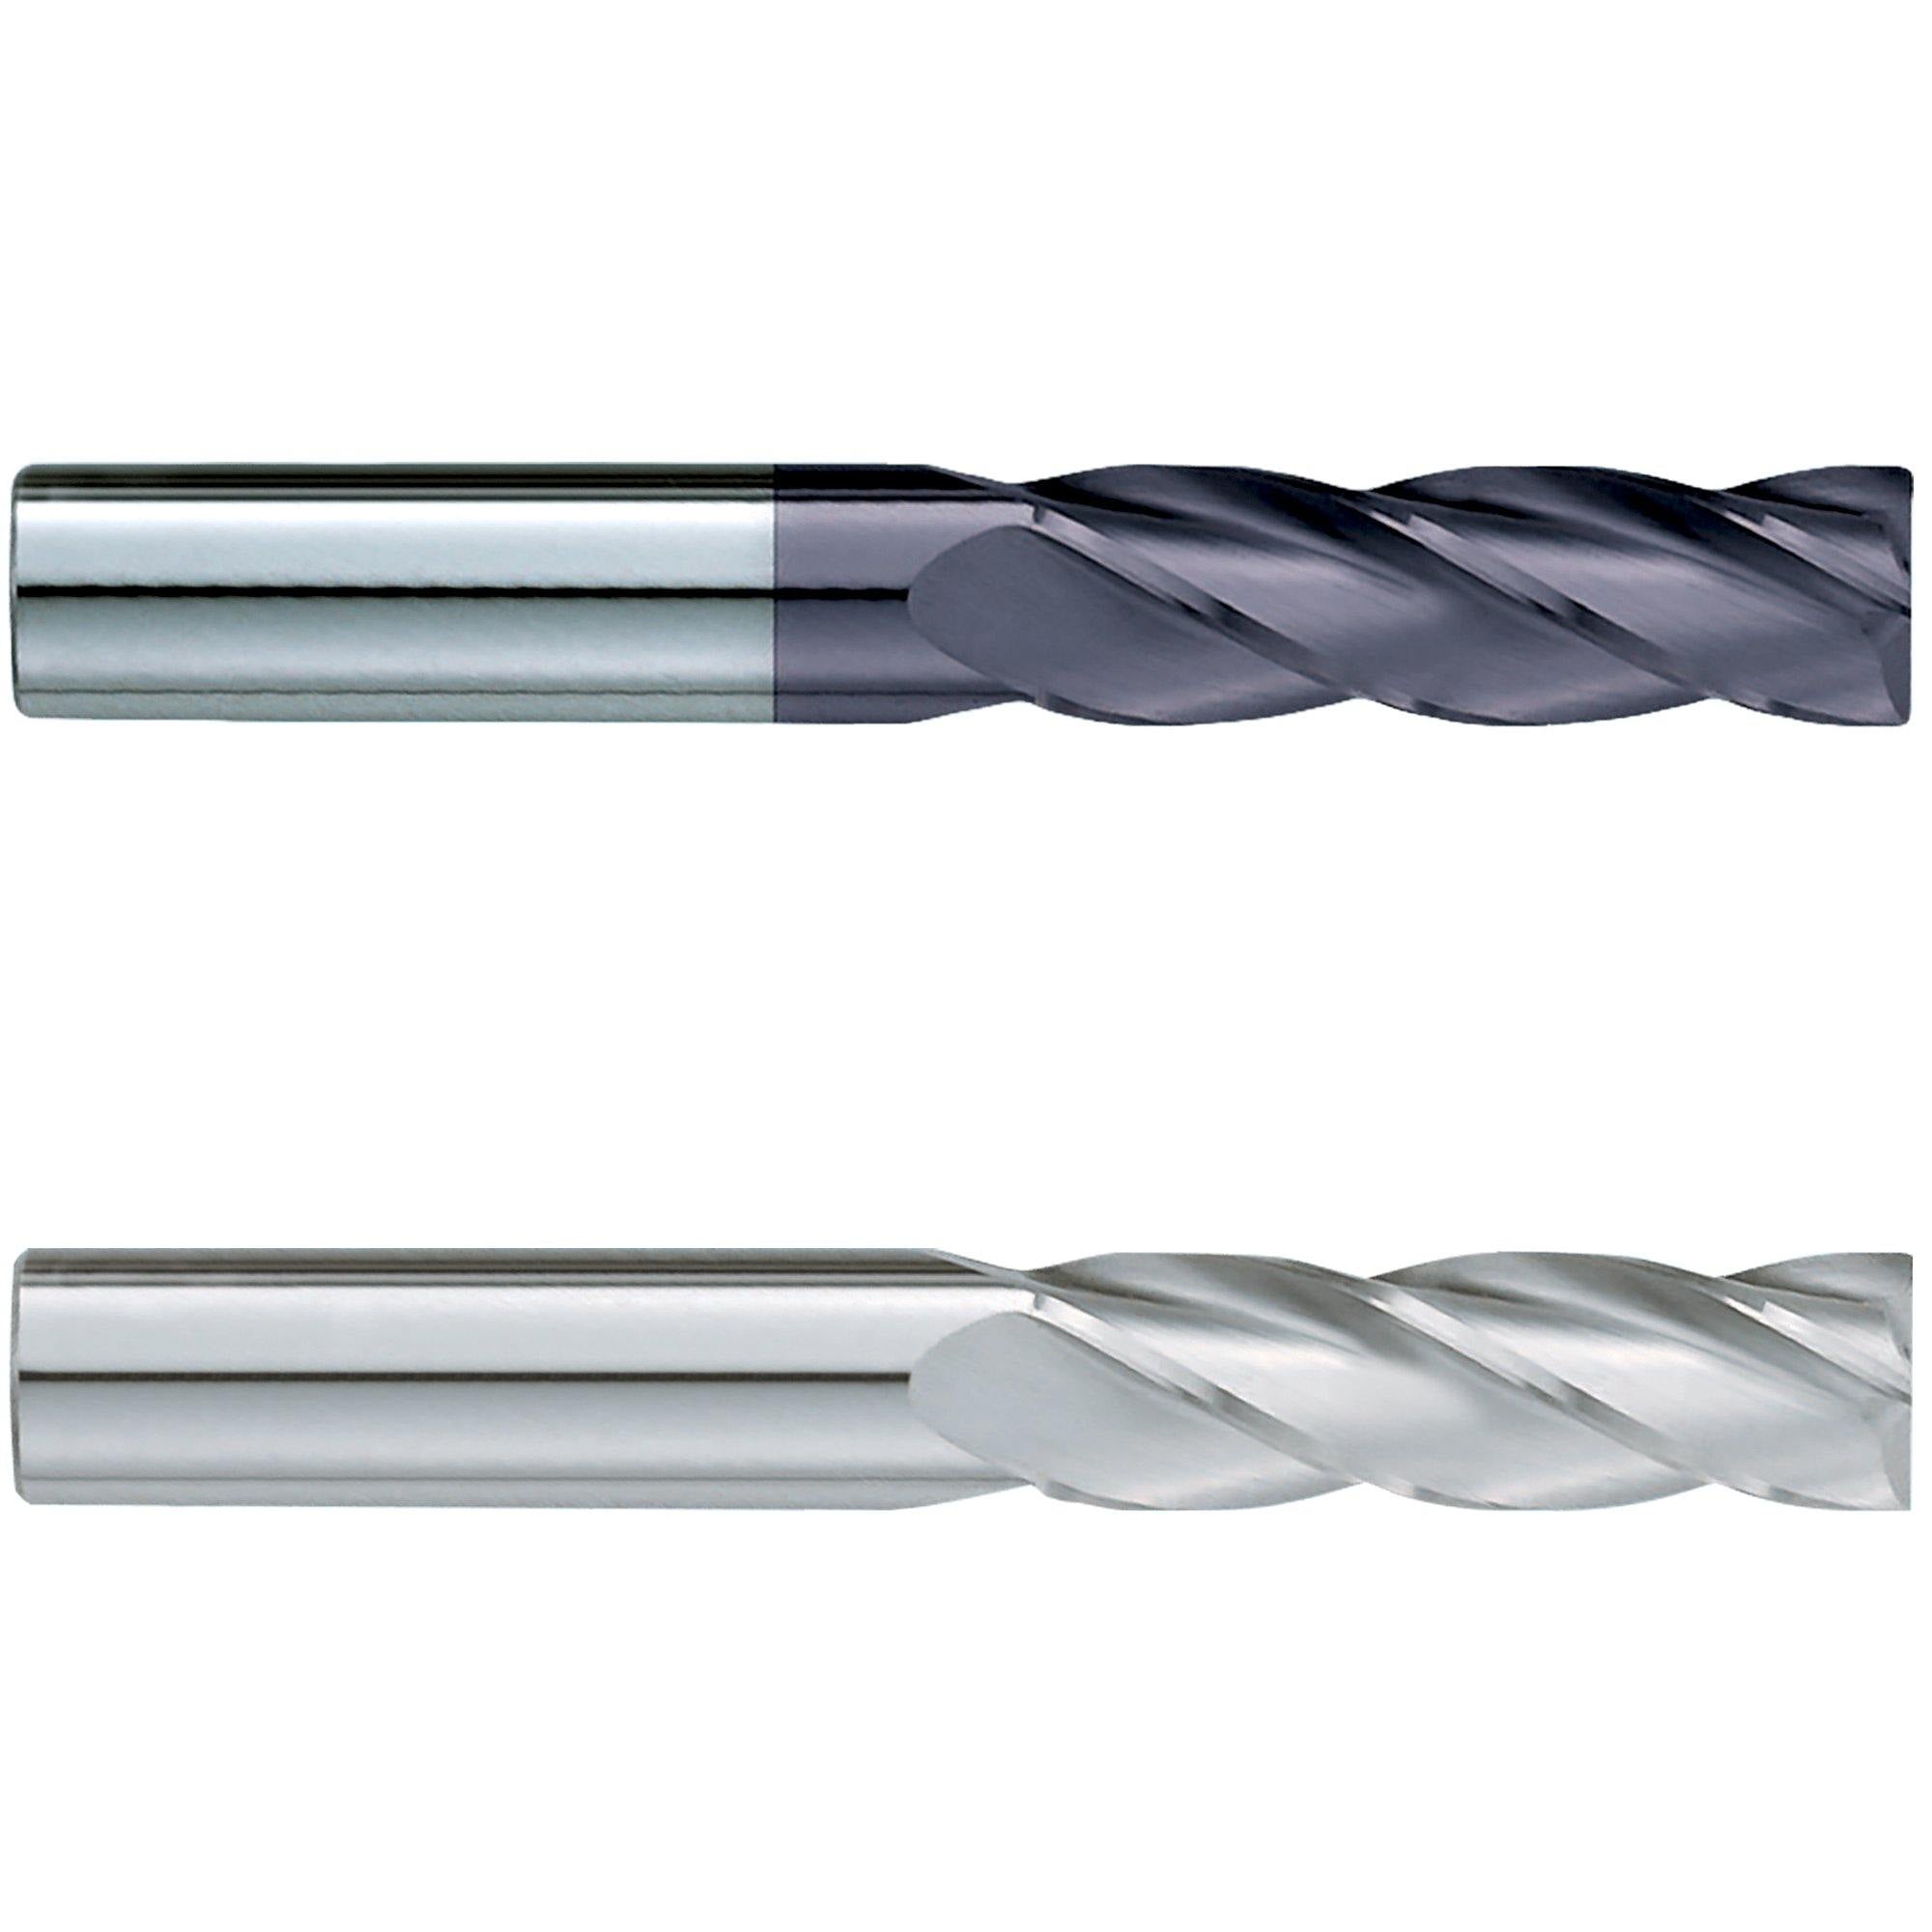 (2 Pack) 1" x 7" x 10" Super Long Square Carbide End Mill - The End Mill Store 